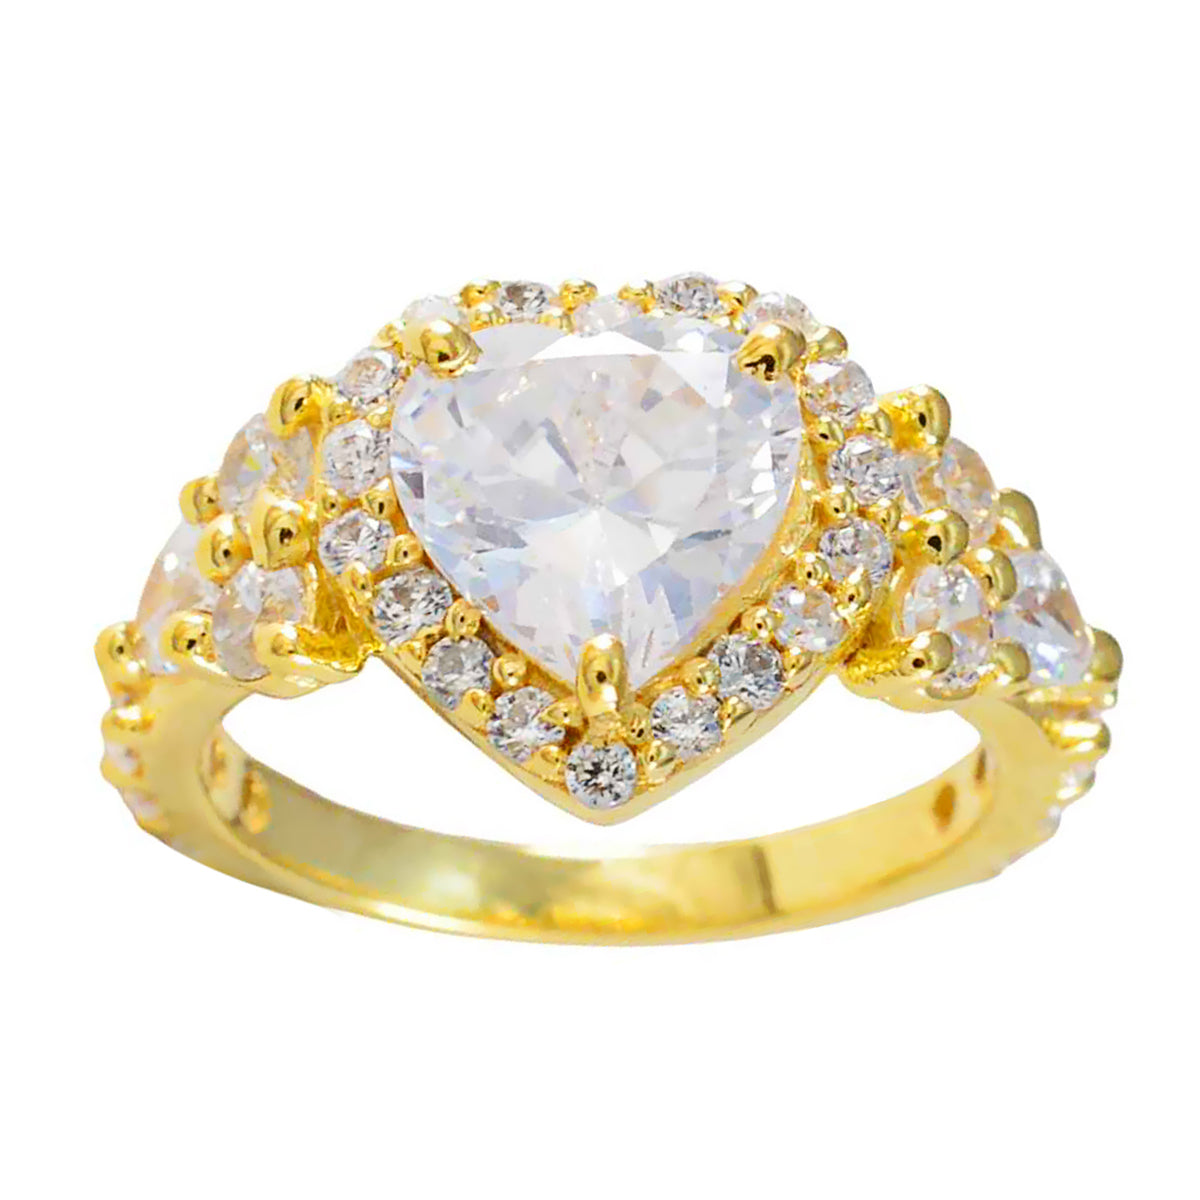 Riyo Classical Silver Ring With Yellow Gold Plating White CZ Stone Heart Shape Prong Setting  Jewelry Engagement Ring